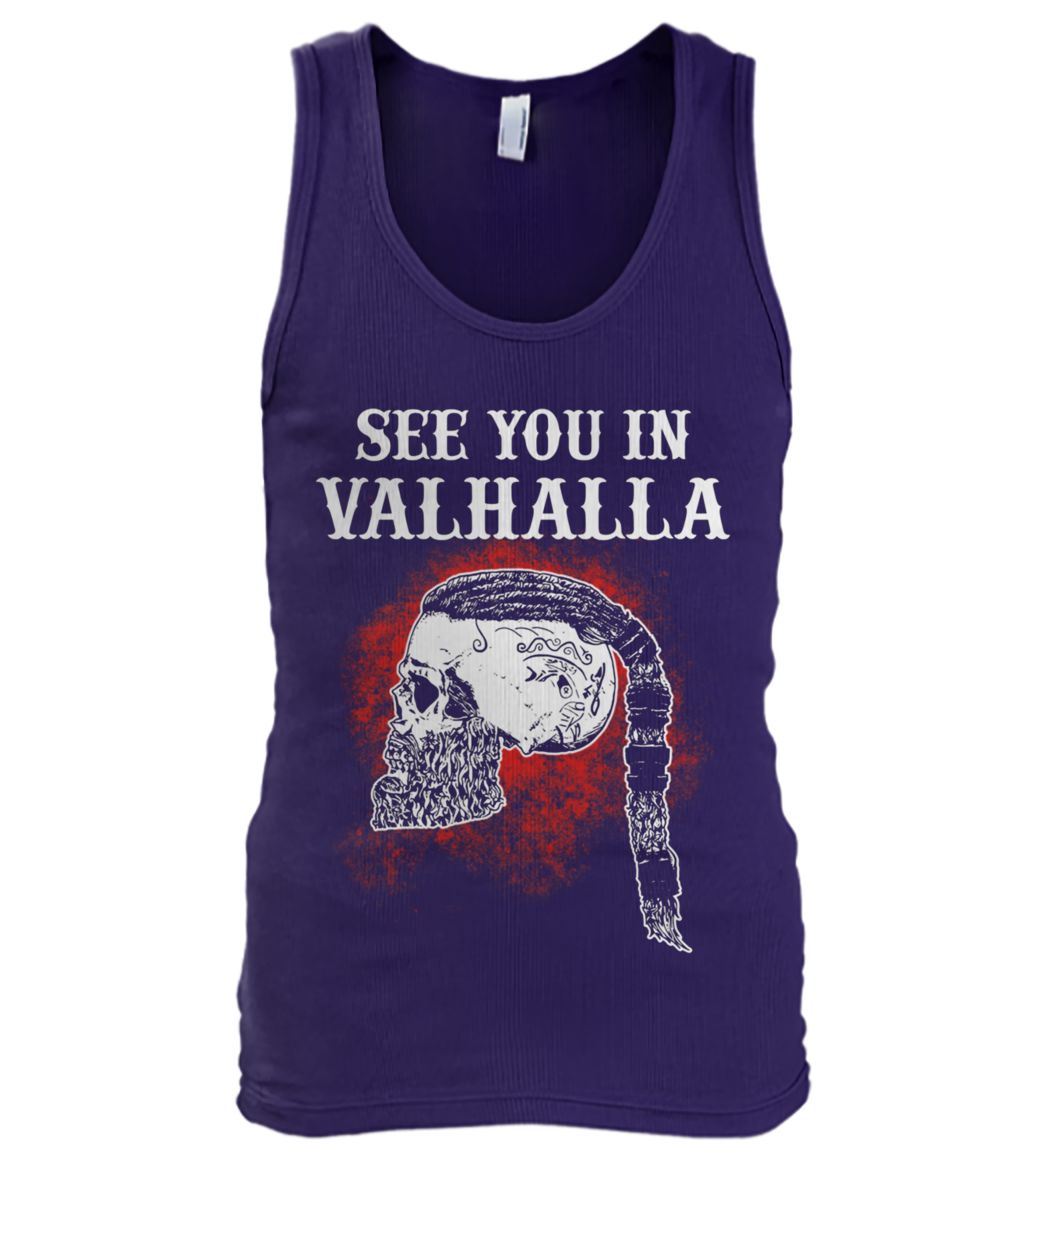 Viking see you in valhalla men's tank top